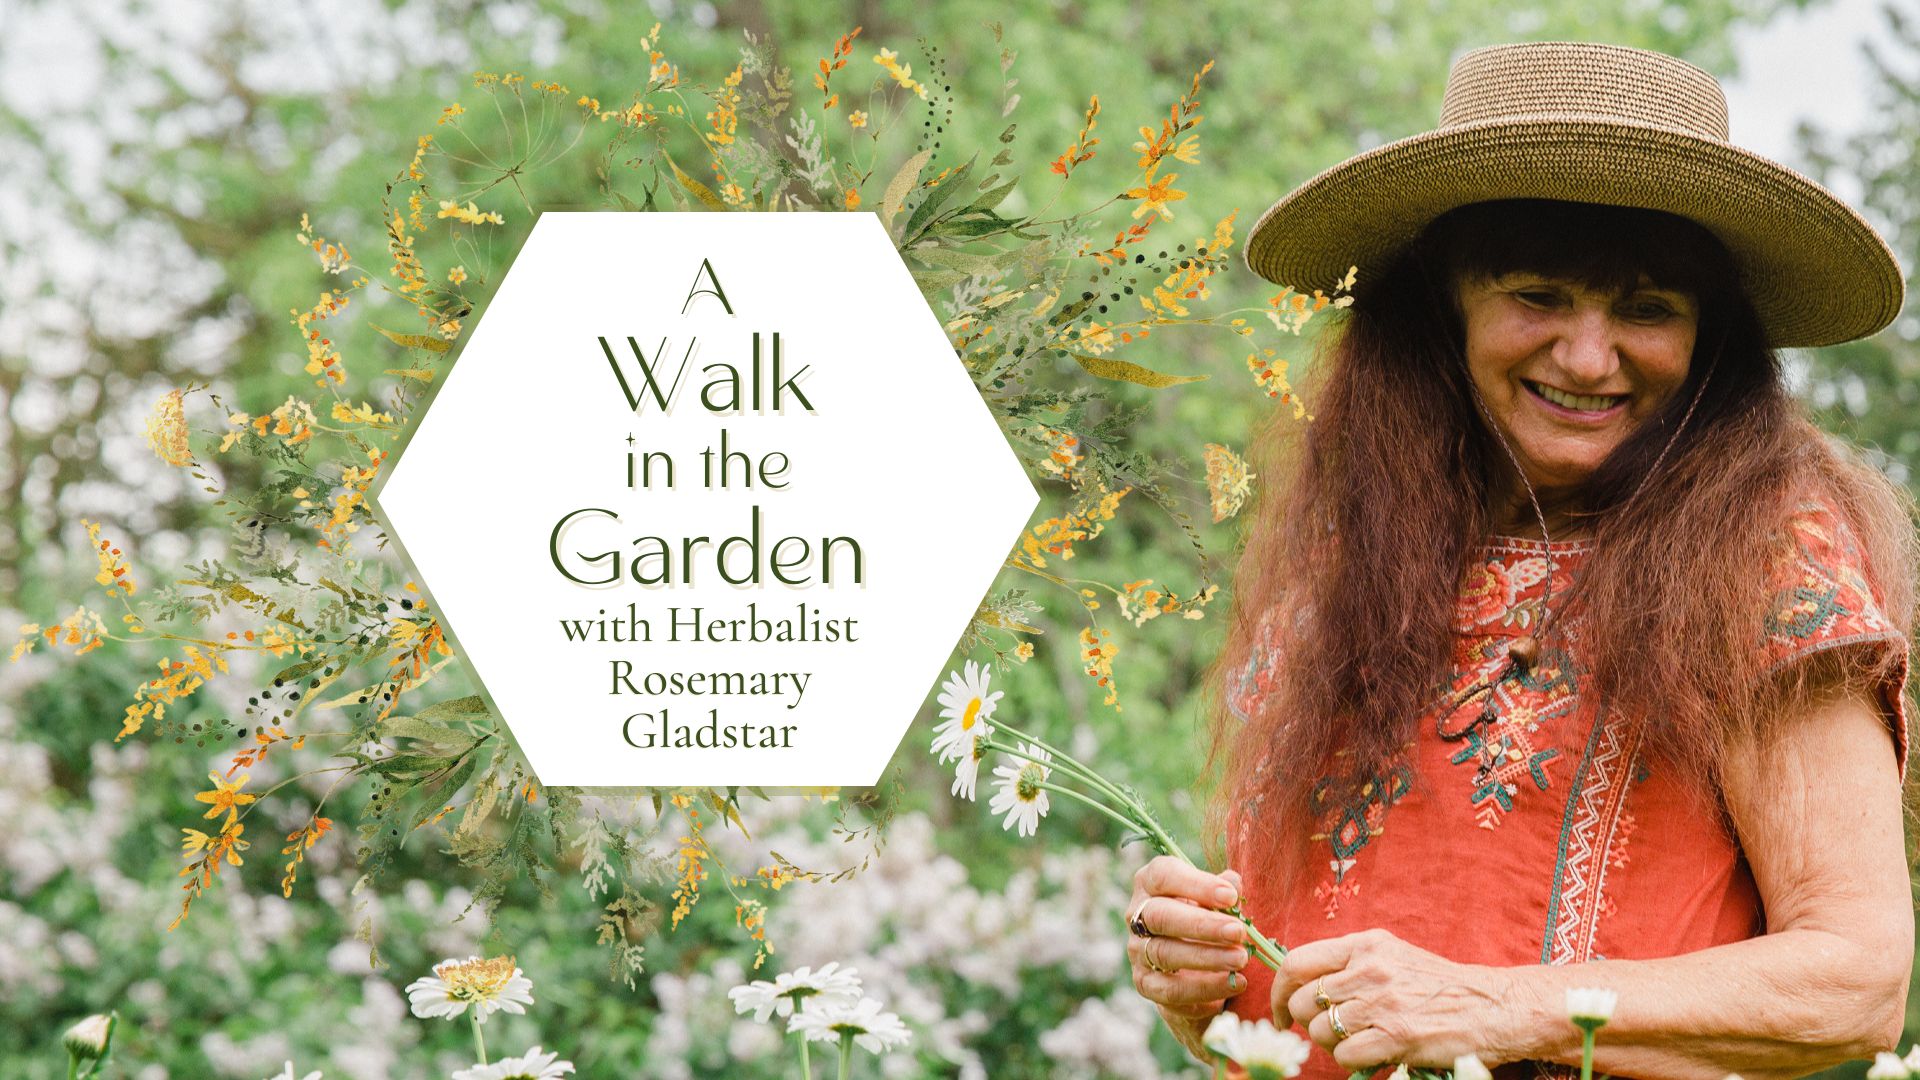 A Walk in the Garden with Herbalist Rosemary Gladstar